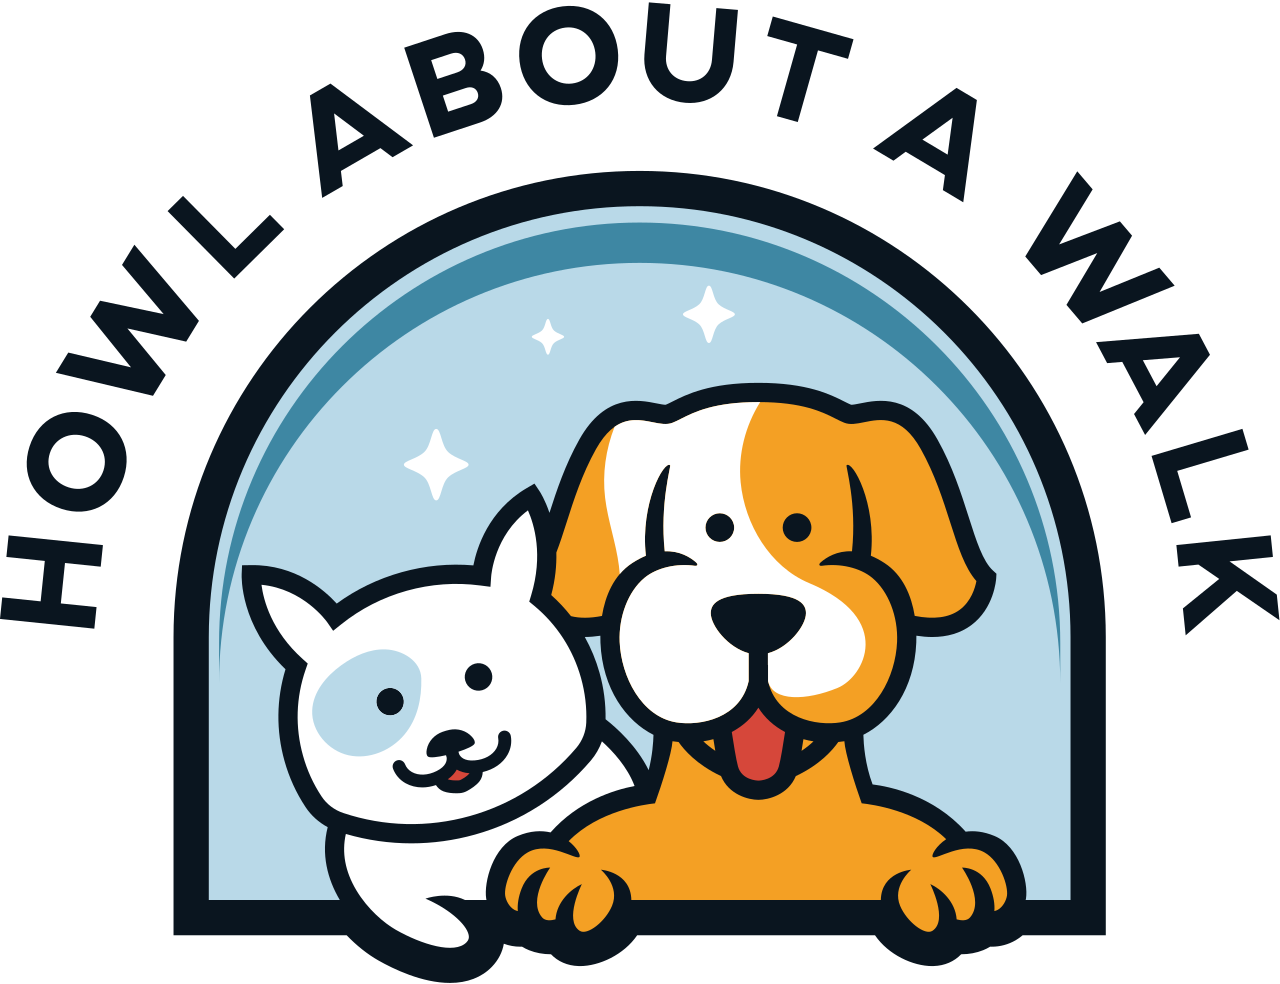 HOWL ABOUT A WALK's logo